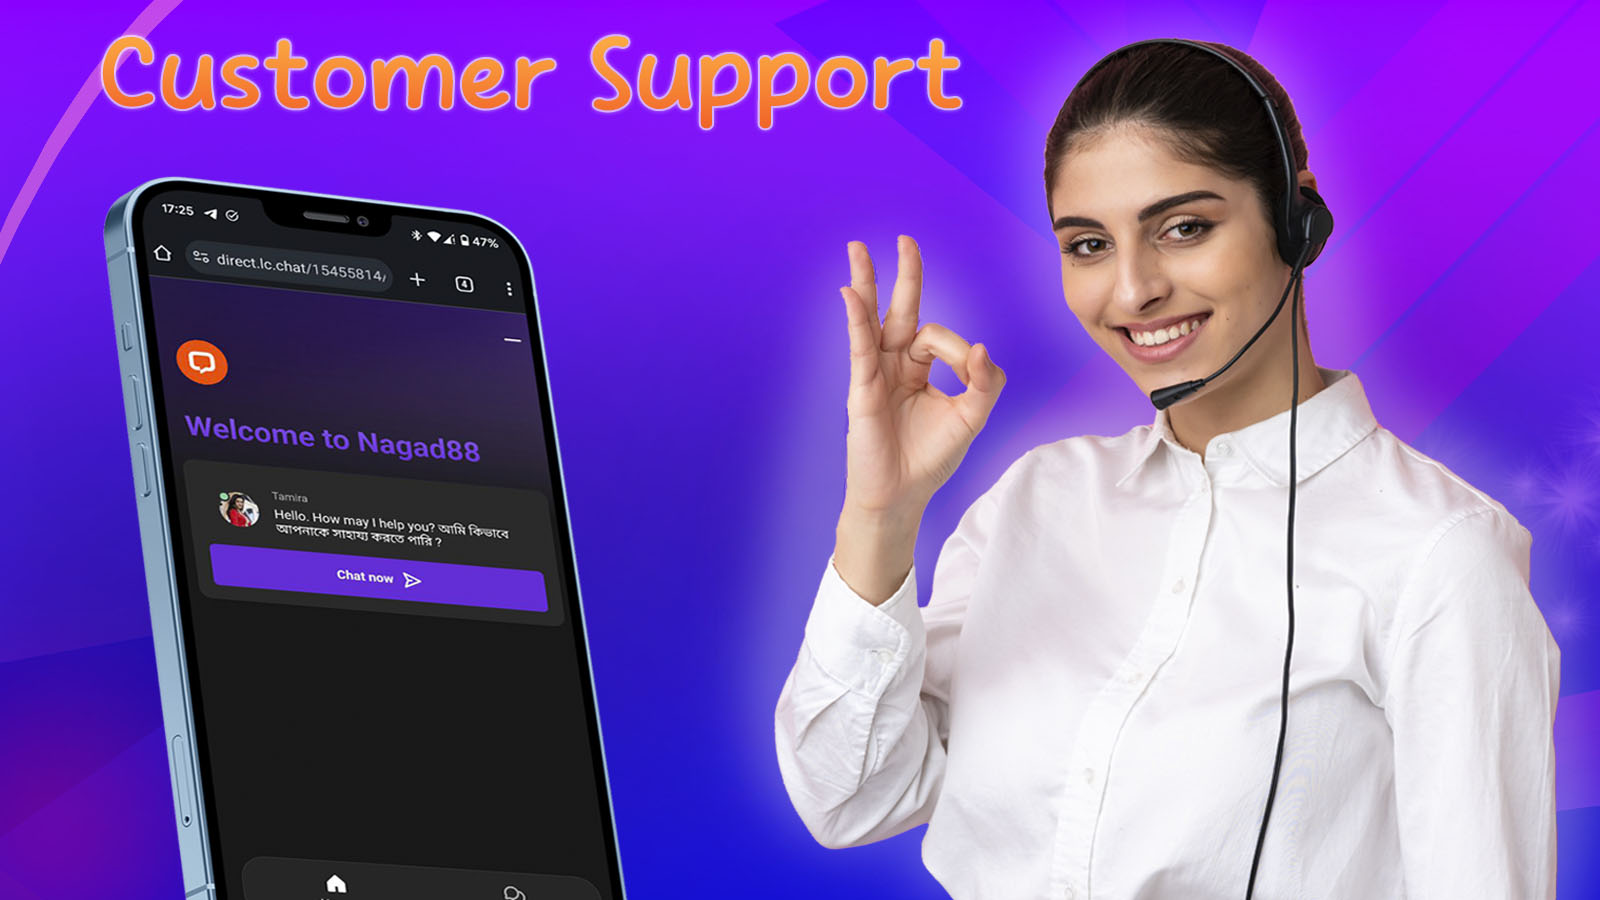 Customer support is available to solve any questions or problems